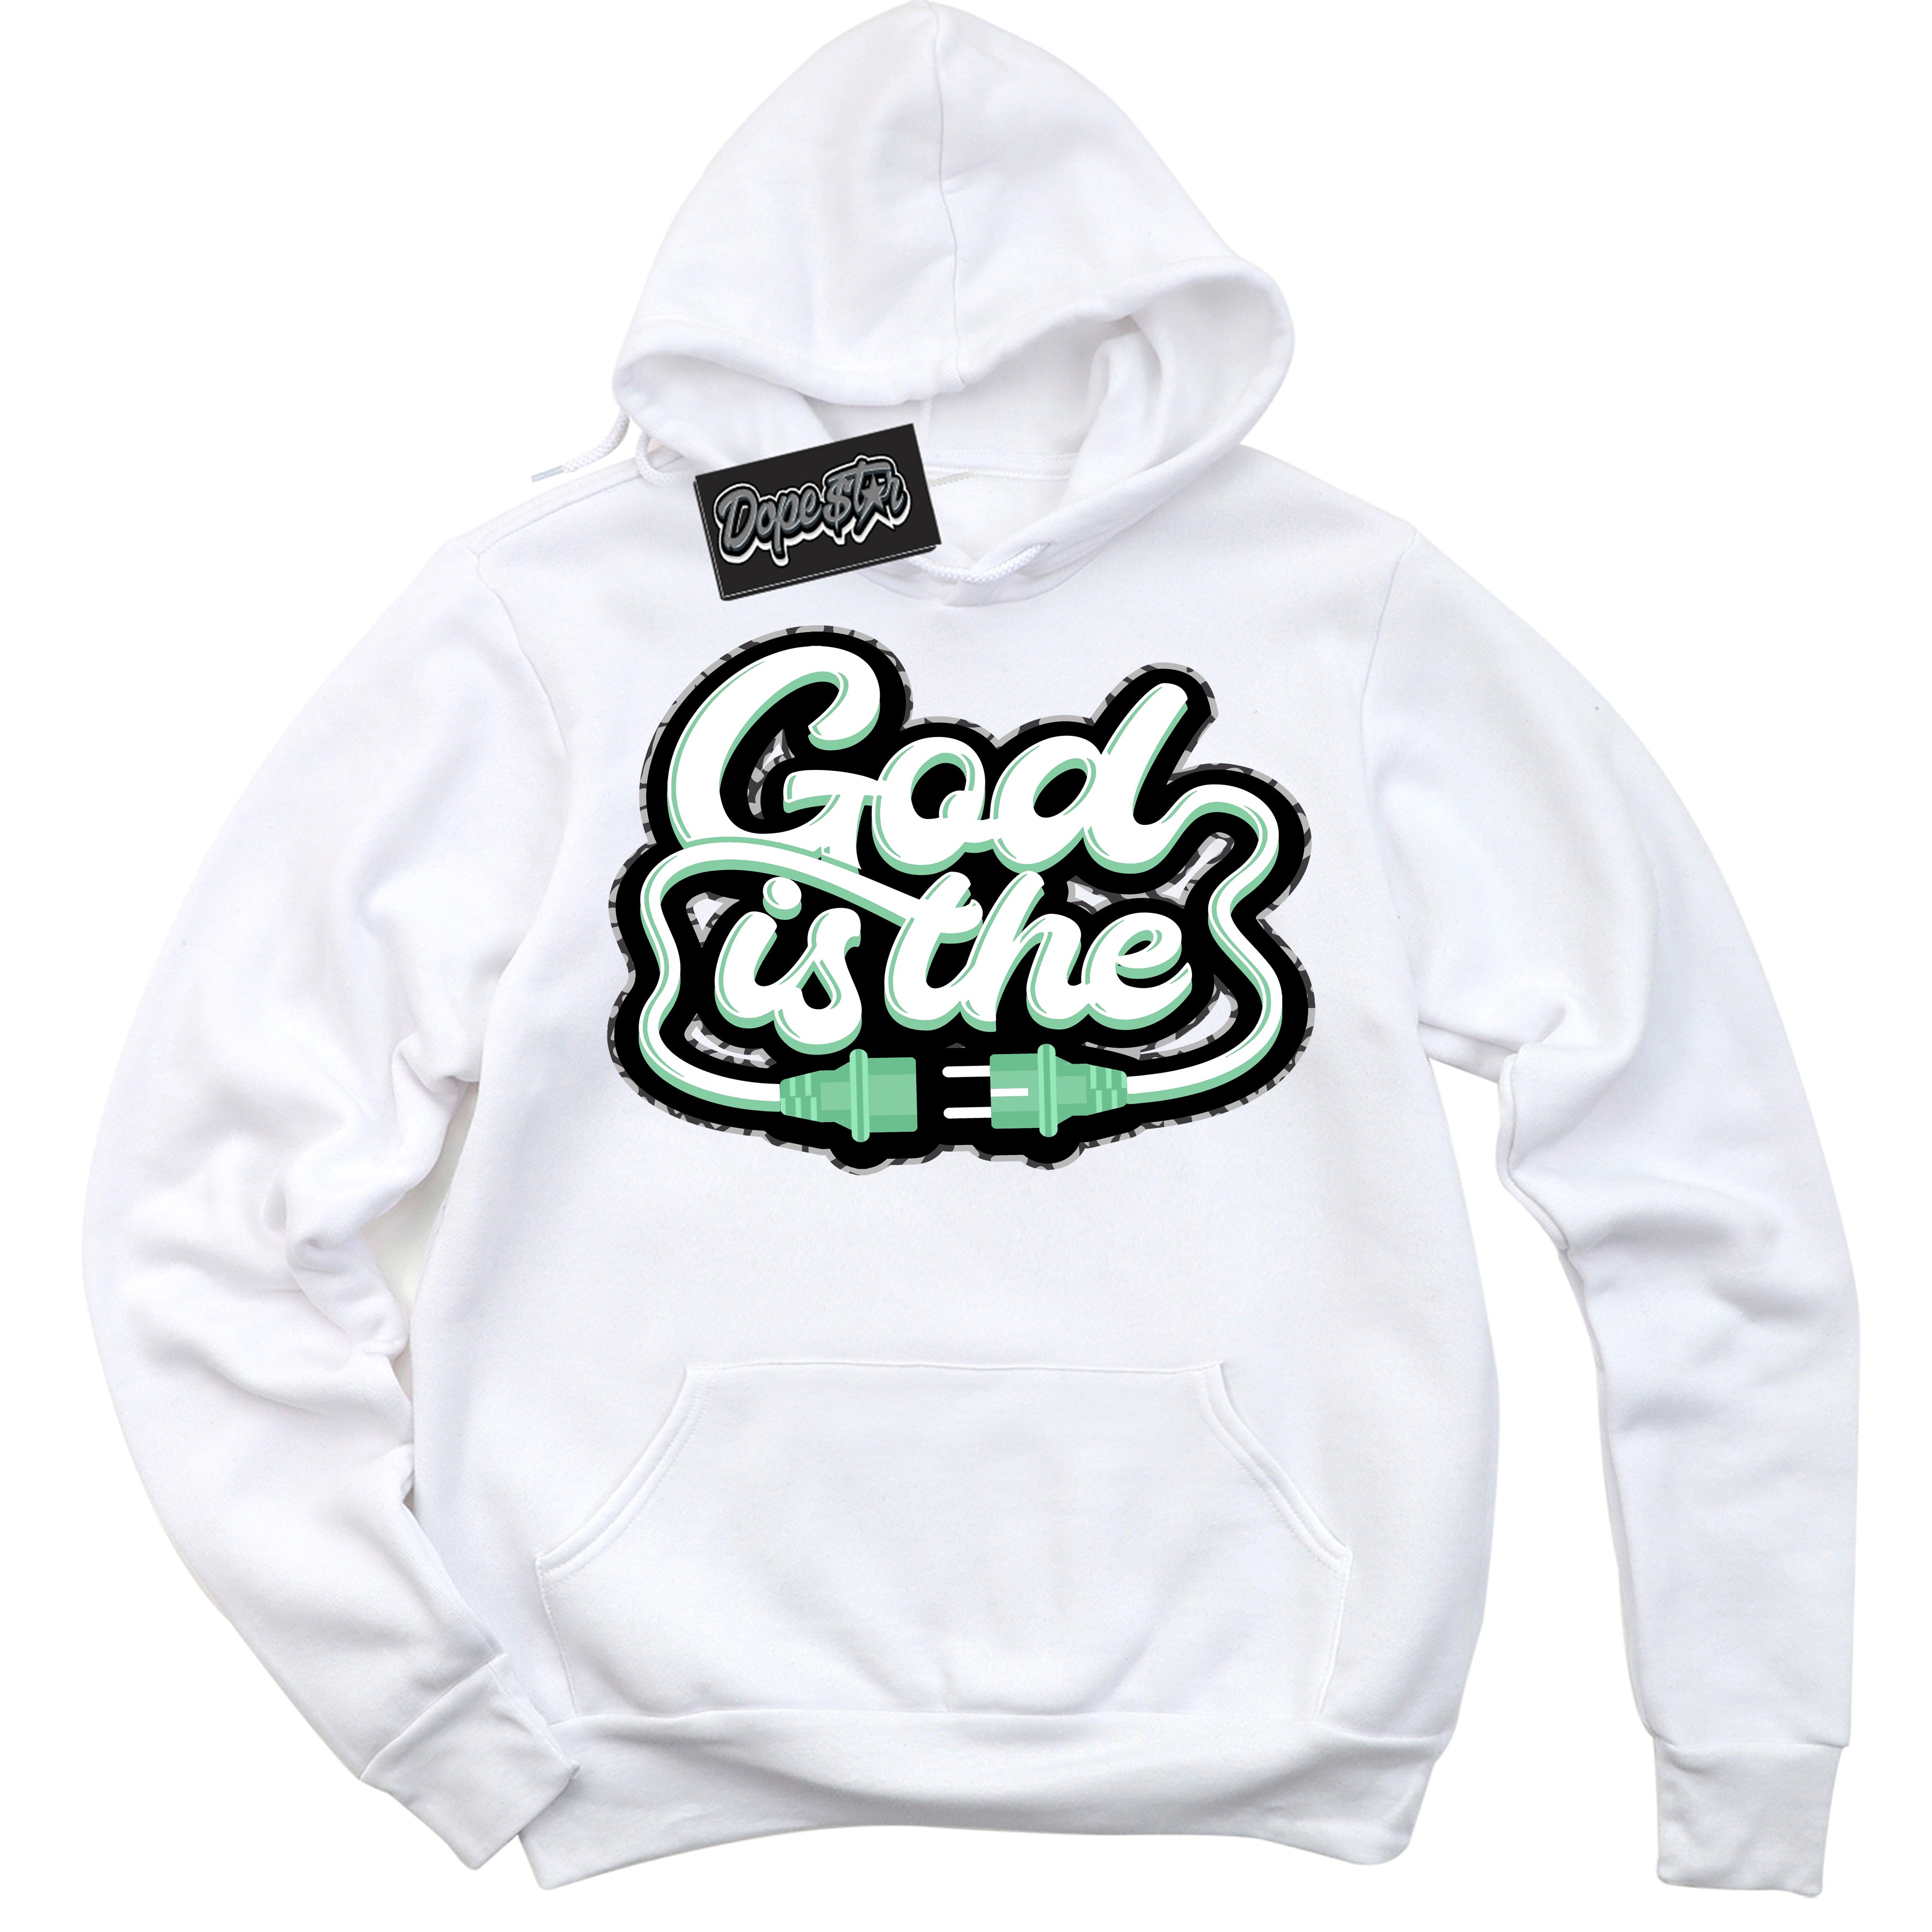 Cool White Graphic DopeStar Hoodie with “ God Is The “ print, that perfectly matches Green Glow 3s sneakers